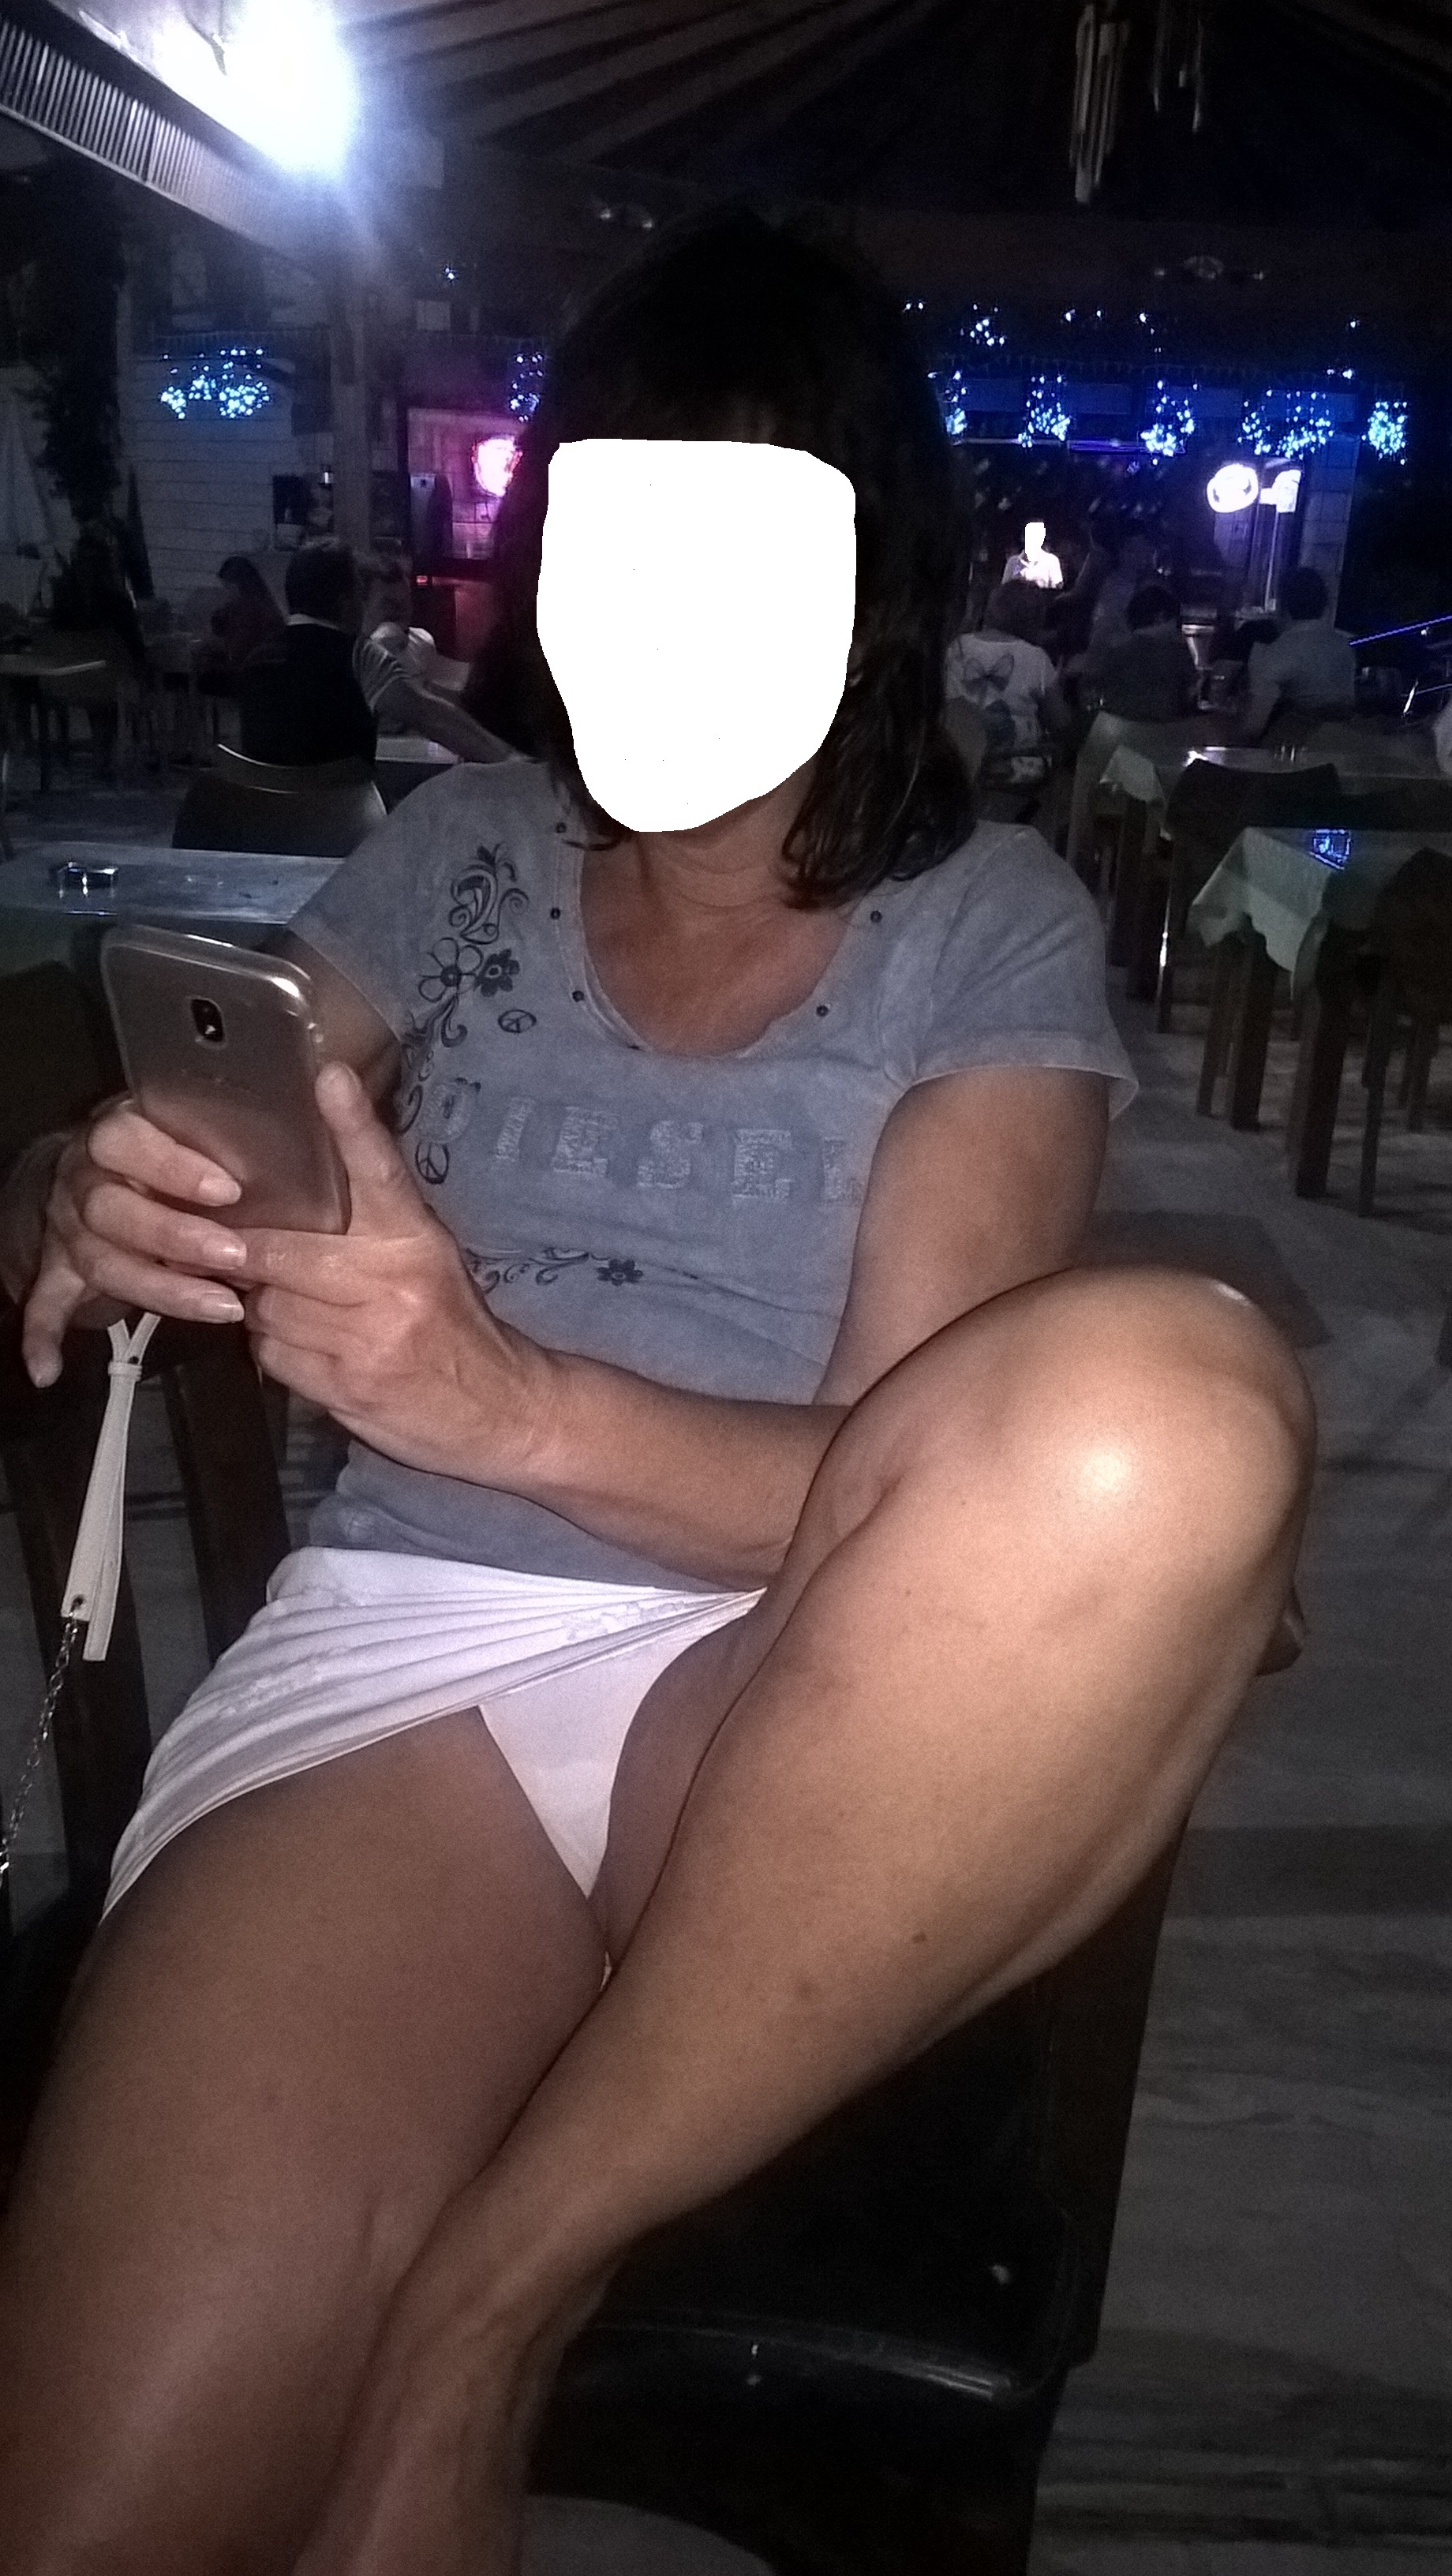 My wife showing a sexy upskirt in the photo